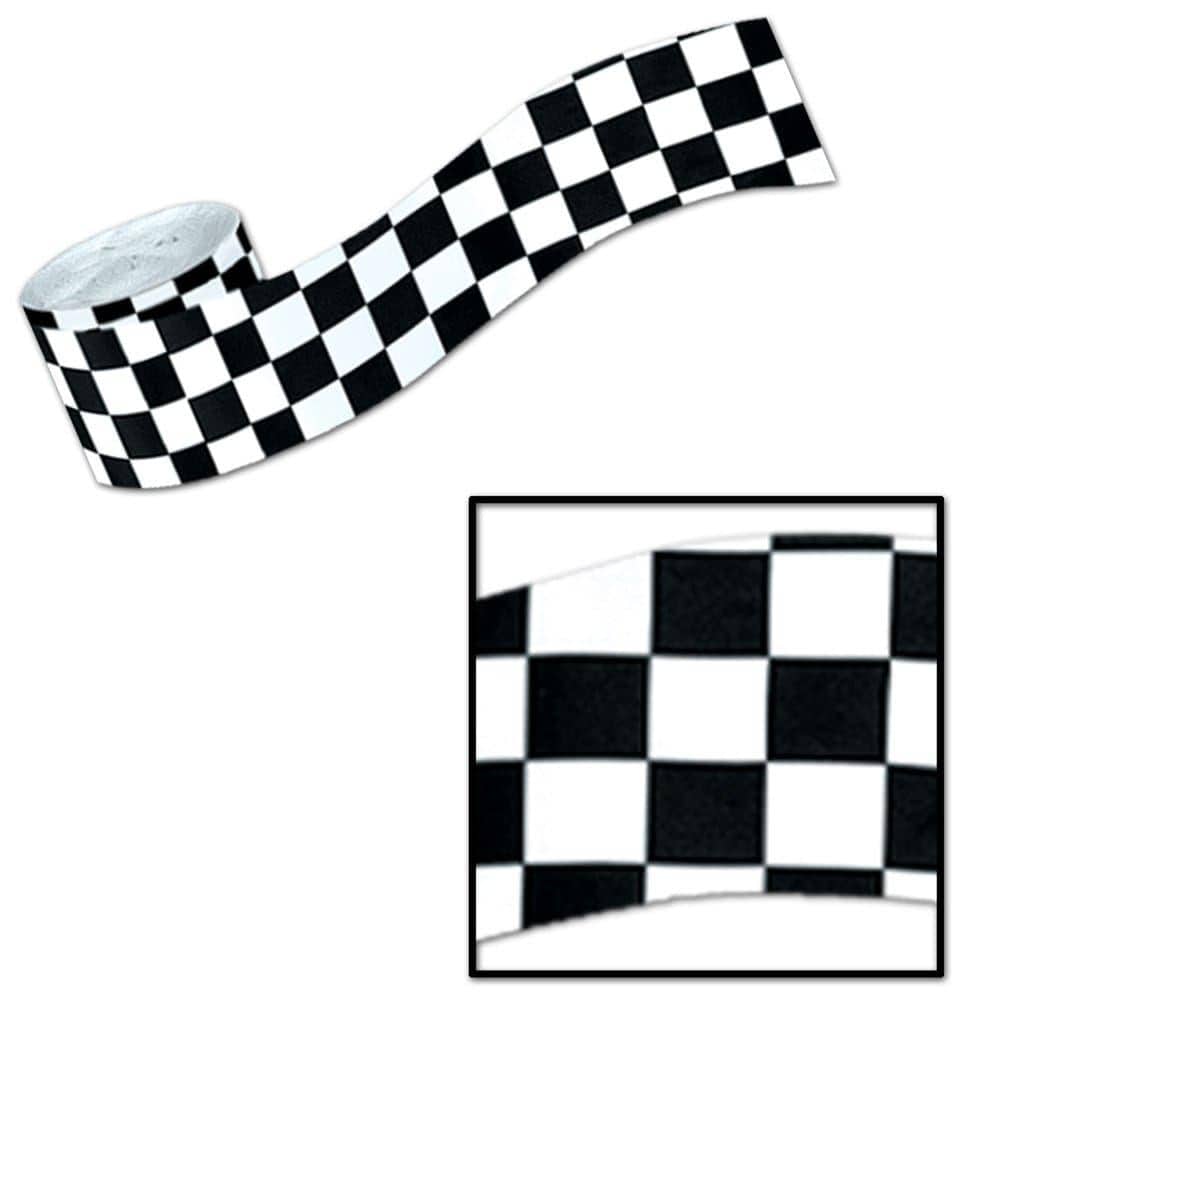 Buy Theme Party Checkered Crepe Streamer sold at Party Expert